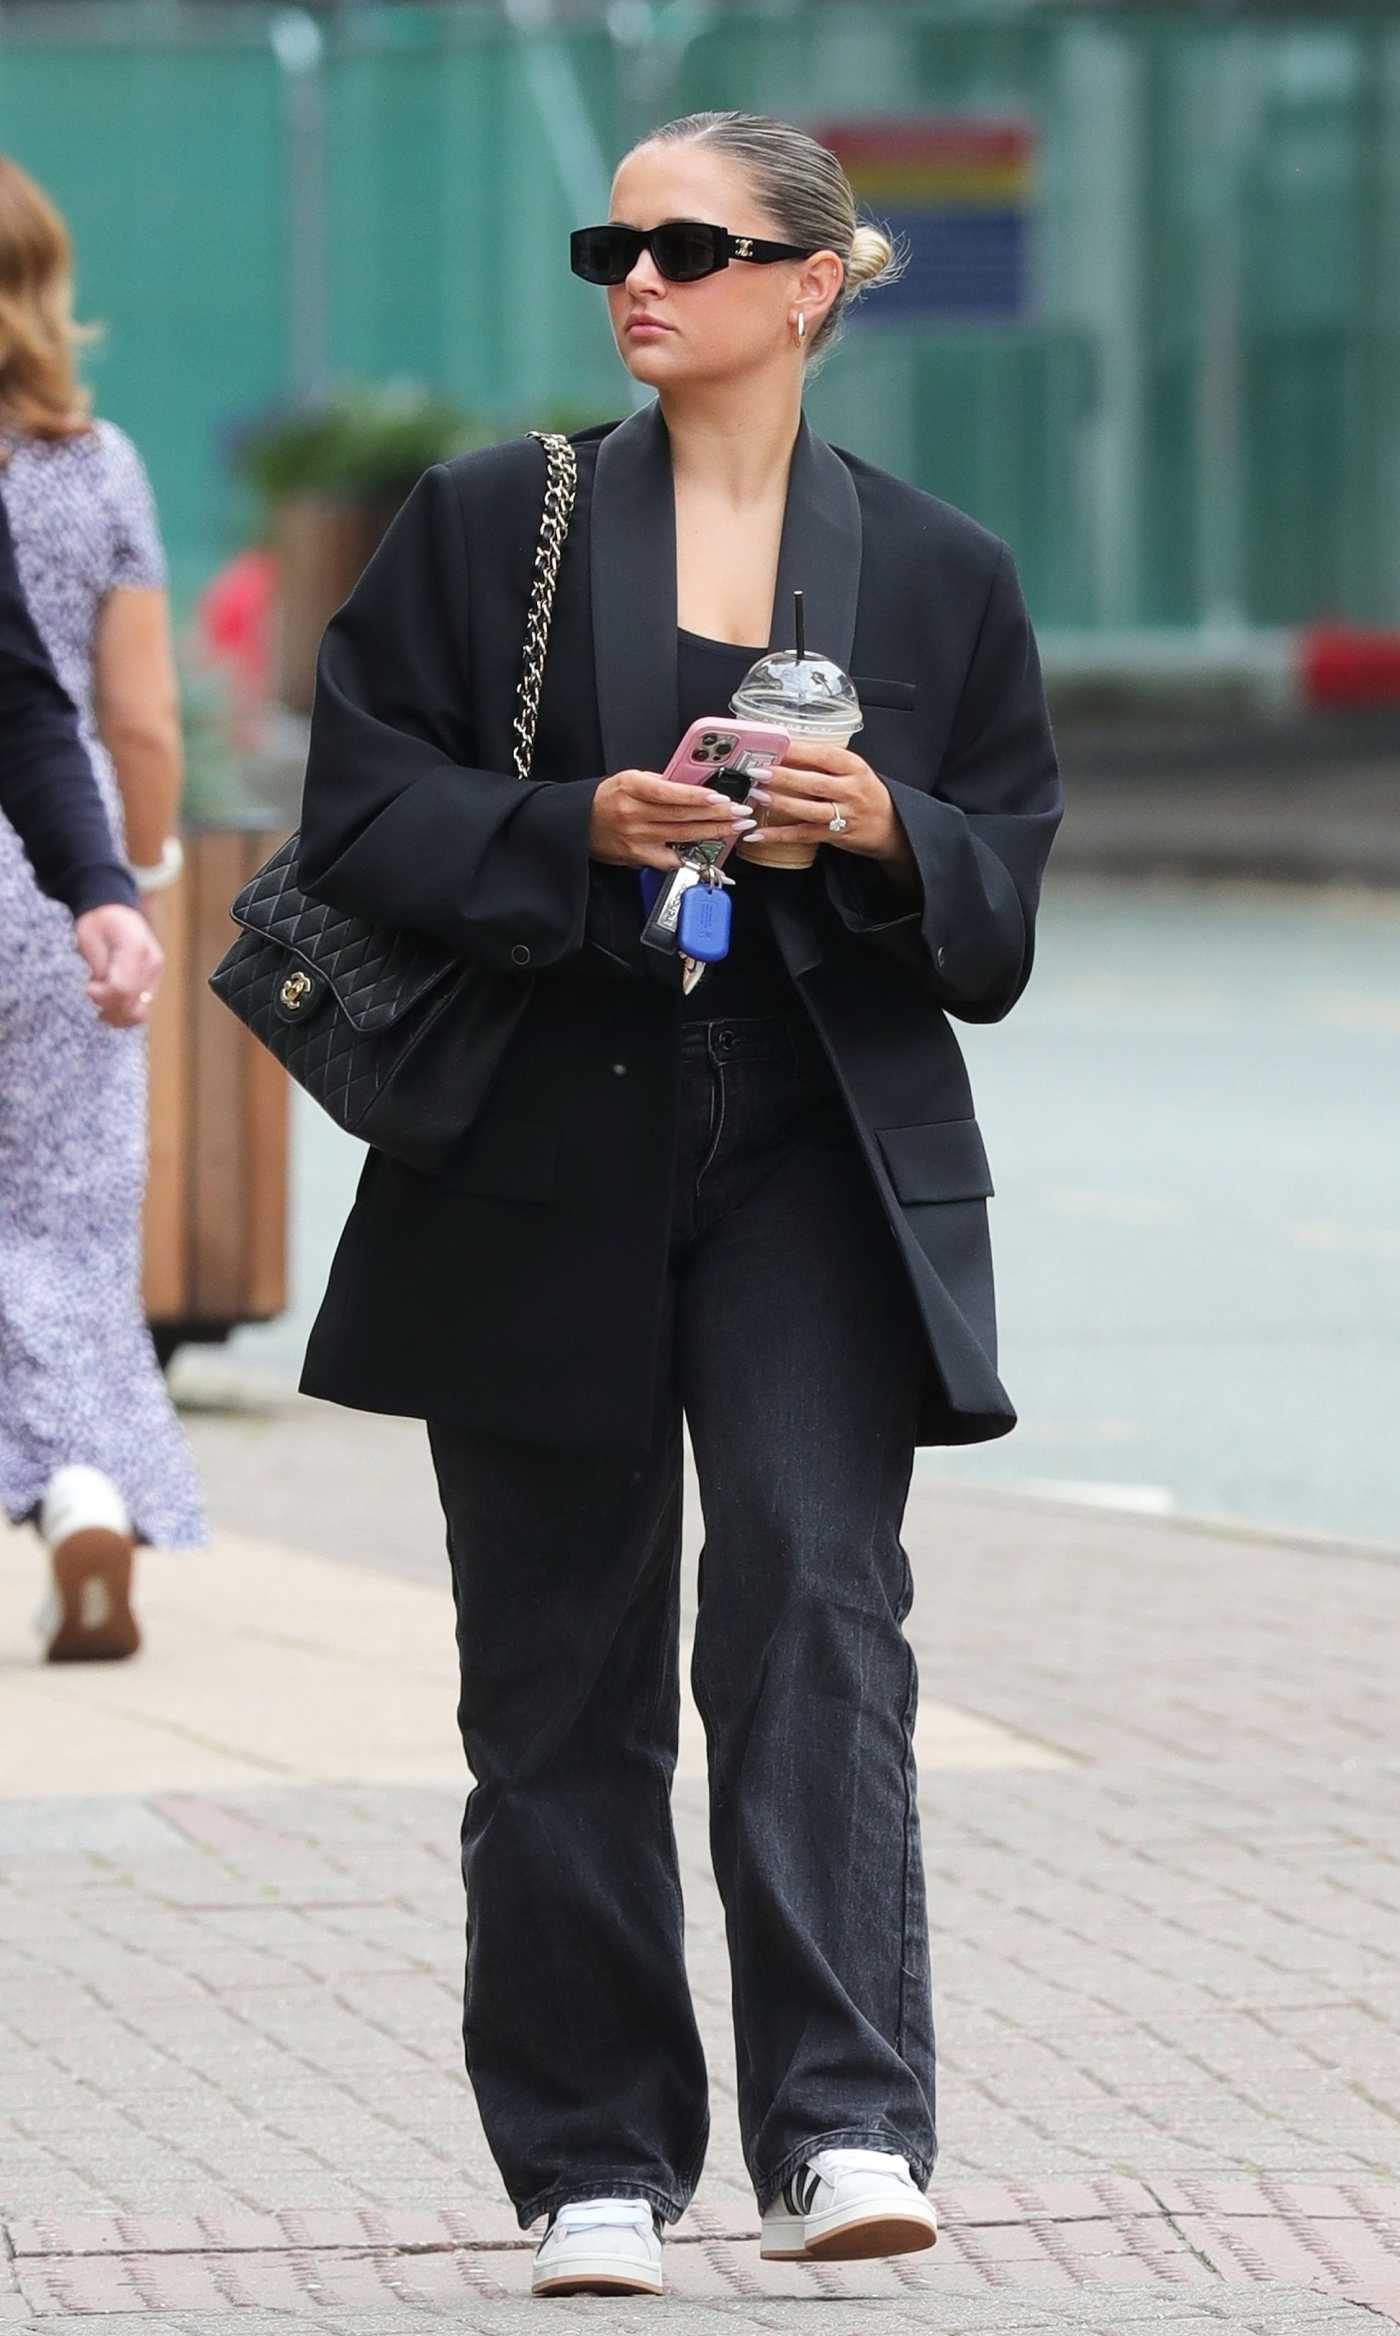 Molly-Mae Hague in a Black Blazer Was Seen Out for Lunch in Hale Trafford in Manchester 08/07/2023